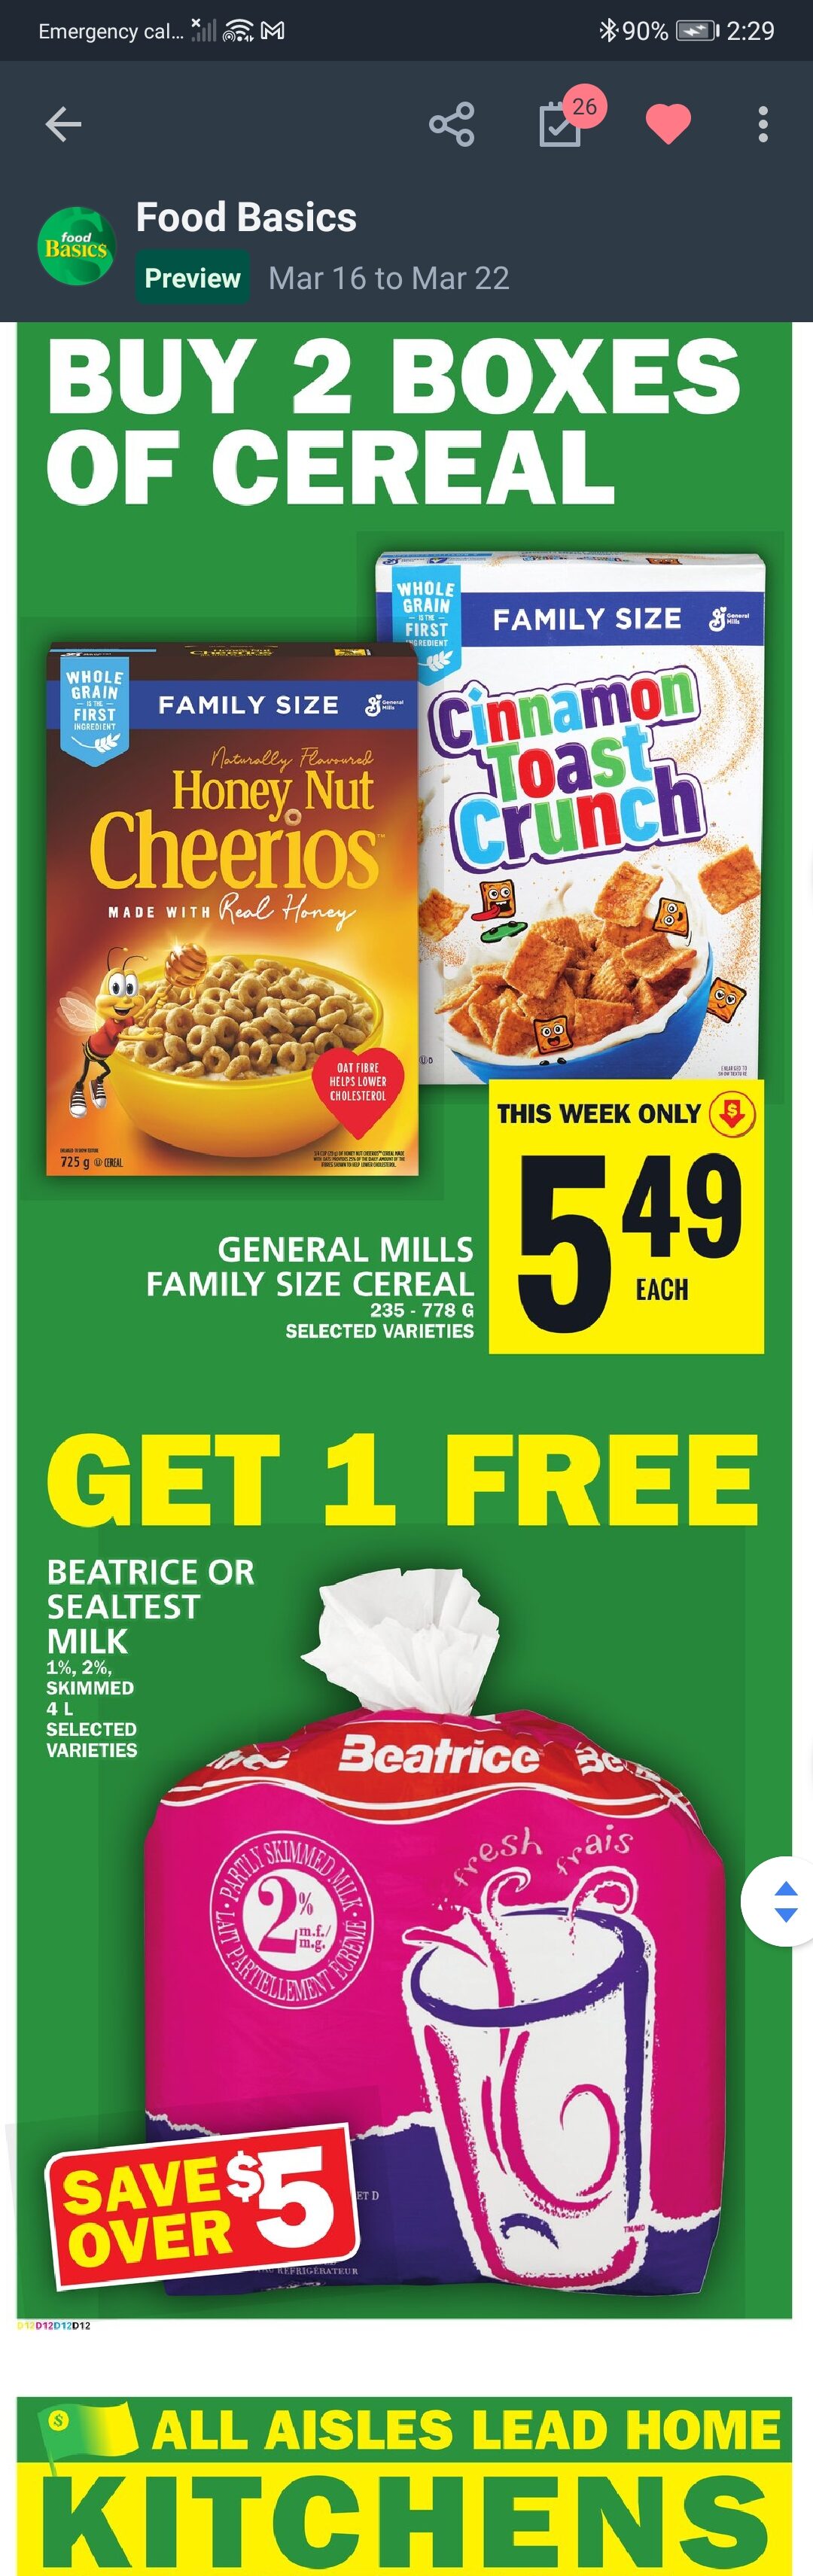 General Mill] Get A Free S'well Snack Bowl With The Purchase of